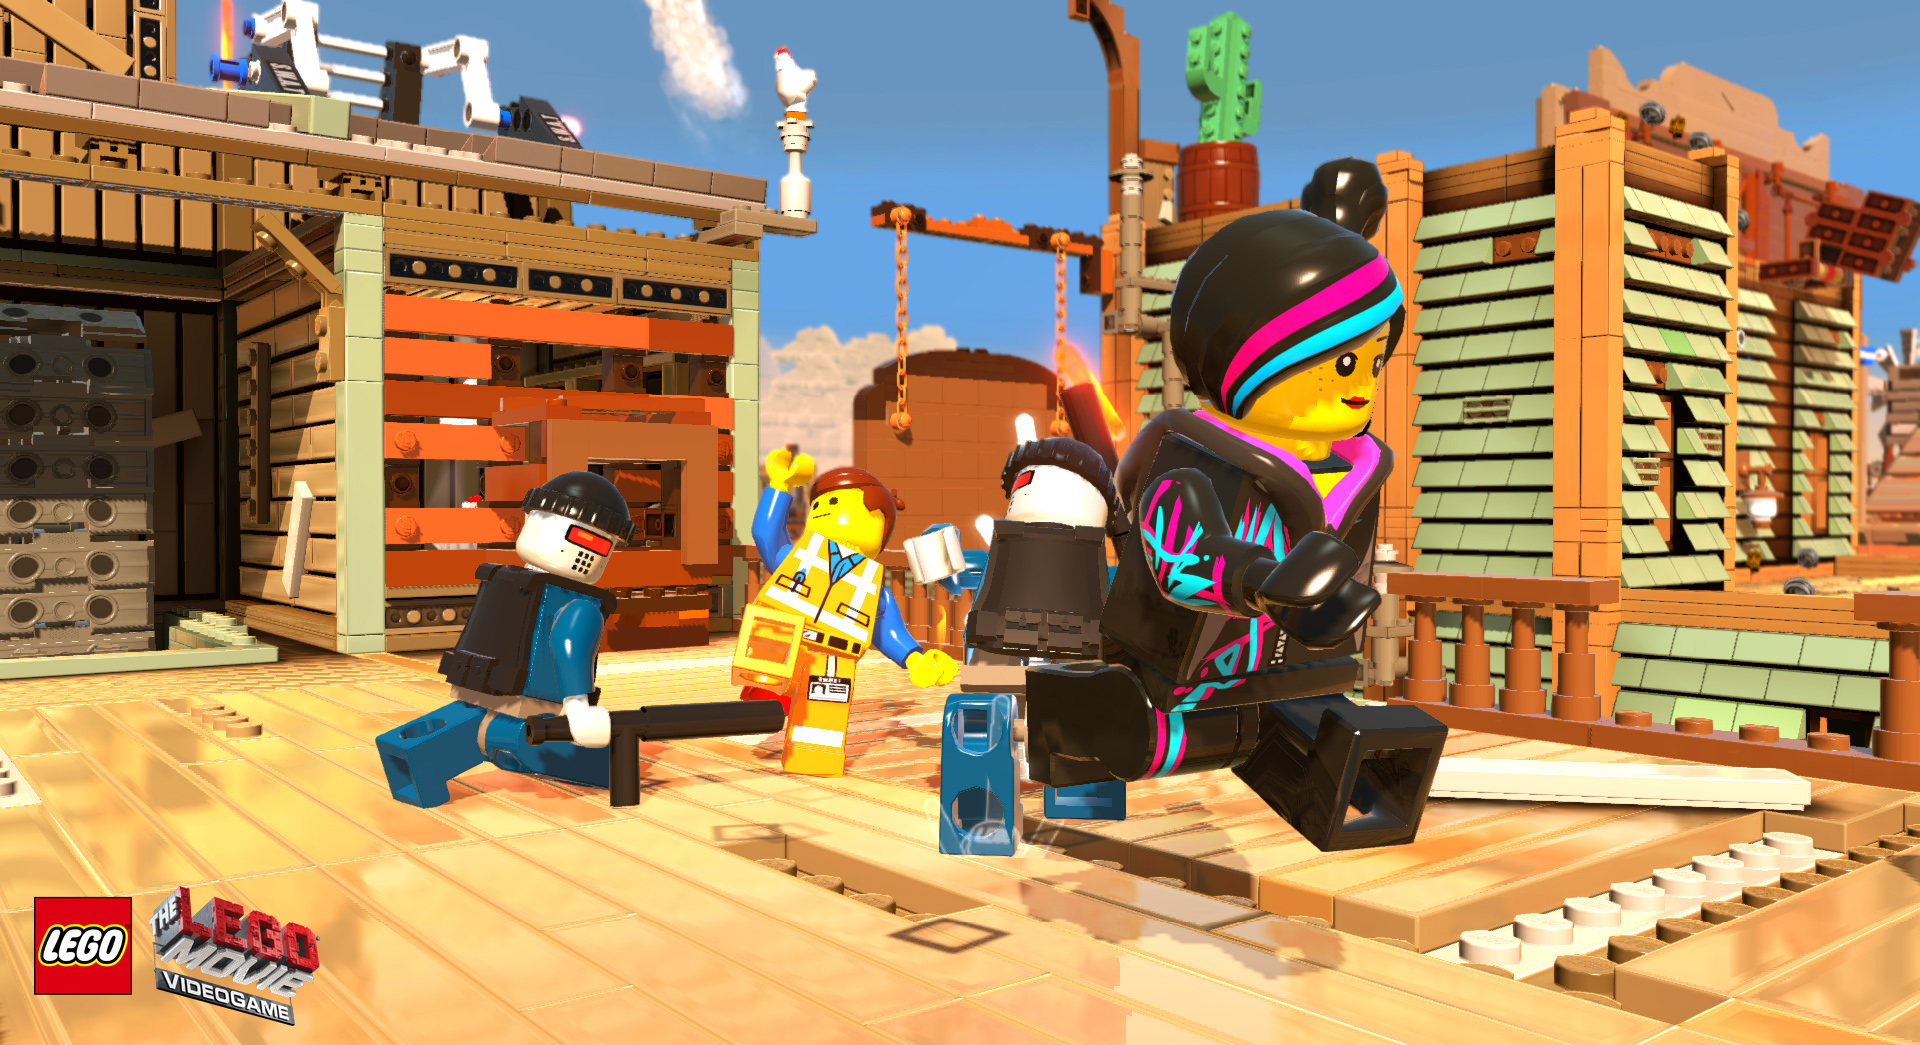 video game, the lego movie videogame, emmet (the lego movie), lego, movie, robot, wyldstyle (the lego movie)